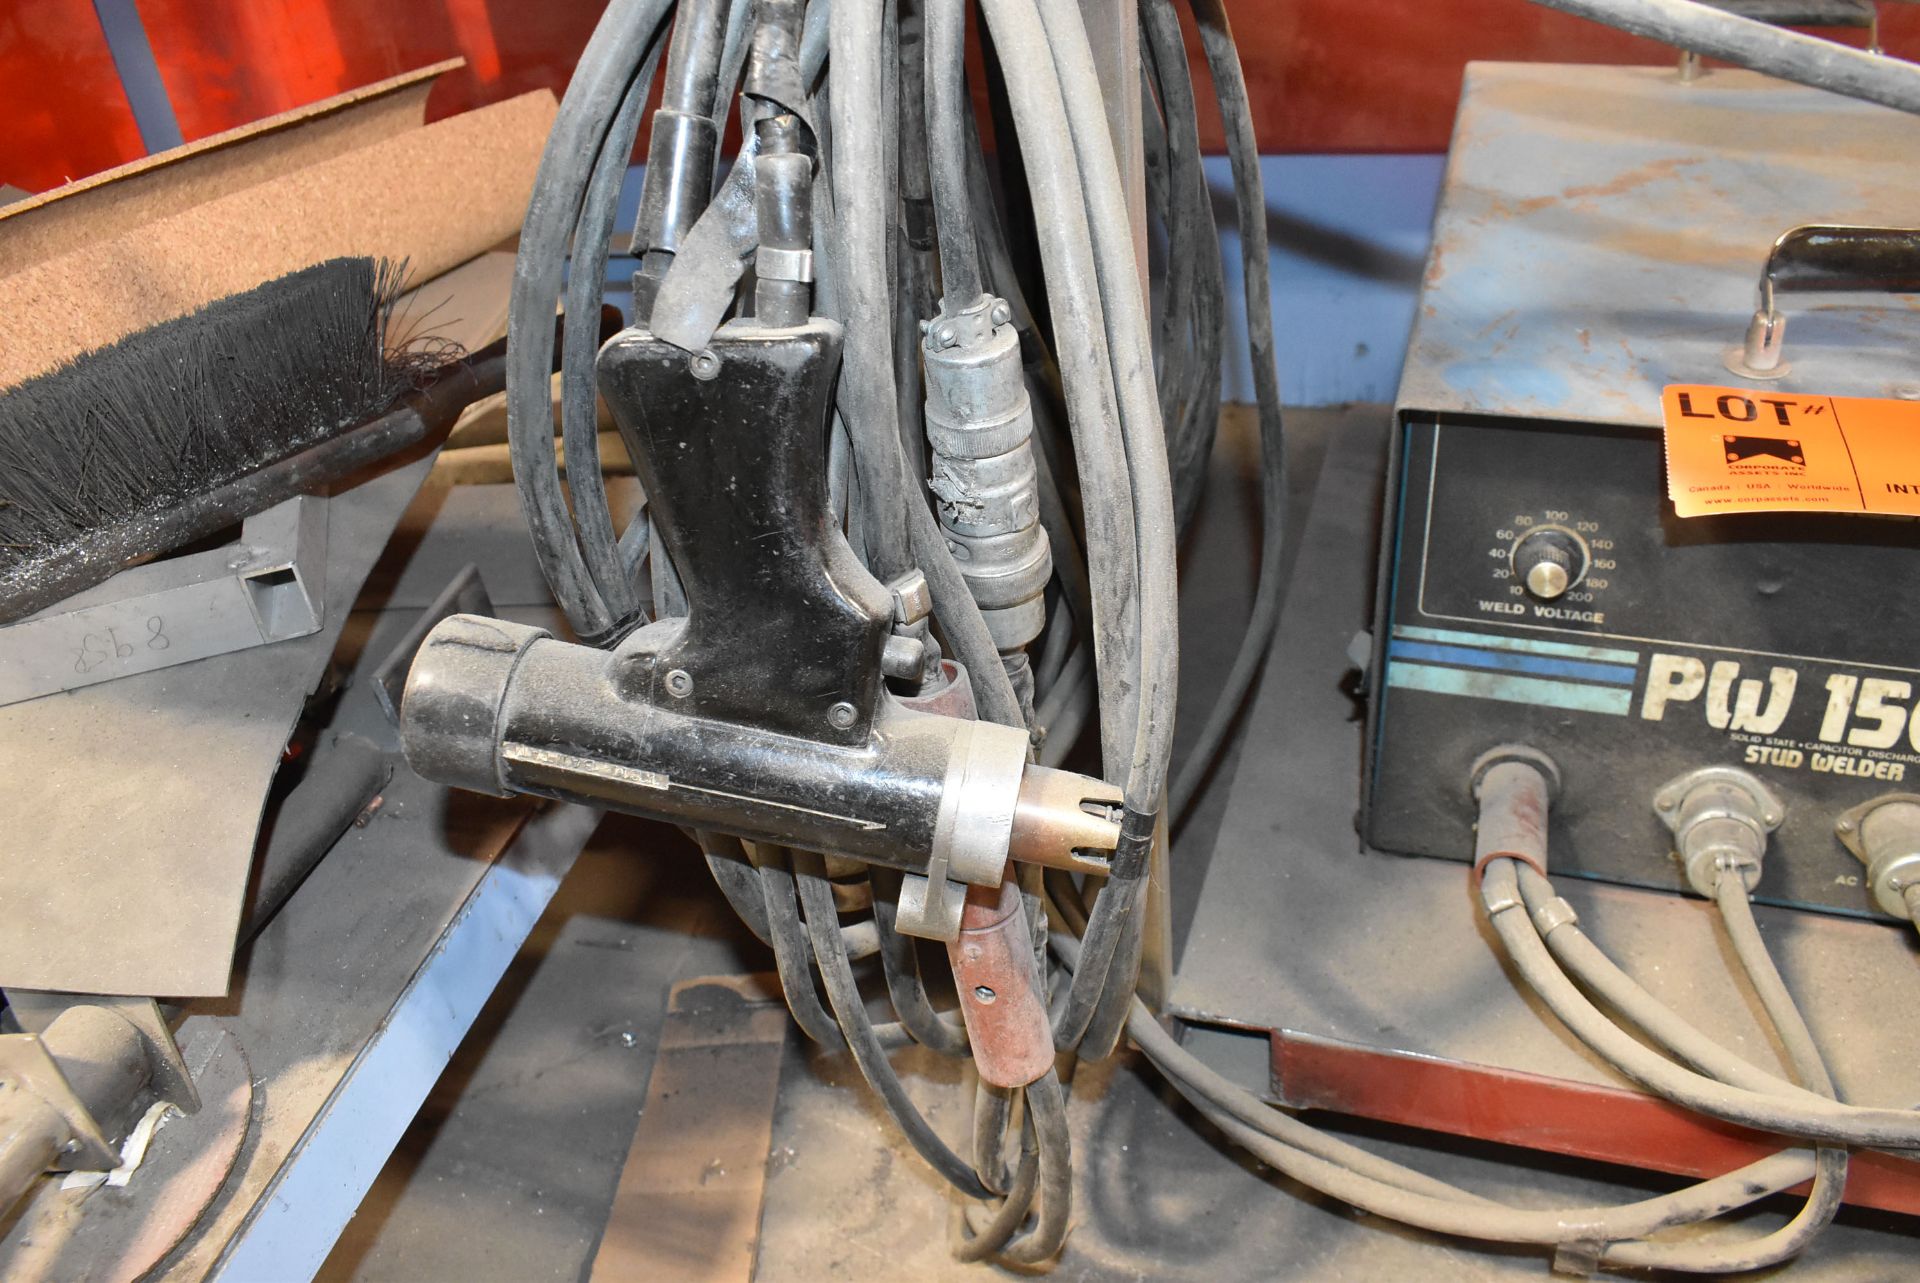 ERICO JONES PW1500 STUD WELDER WITH CABLES AND GUN S/N 183140 [RIGGING FOR FOR LOT #7 - $25 CAD PLUS - Image 4 of 4